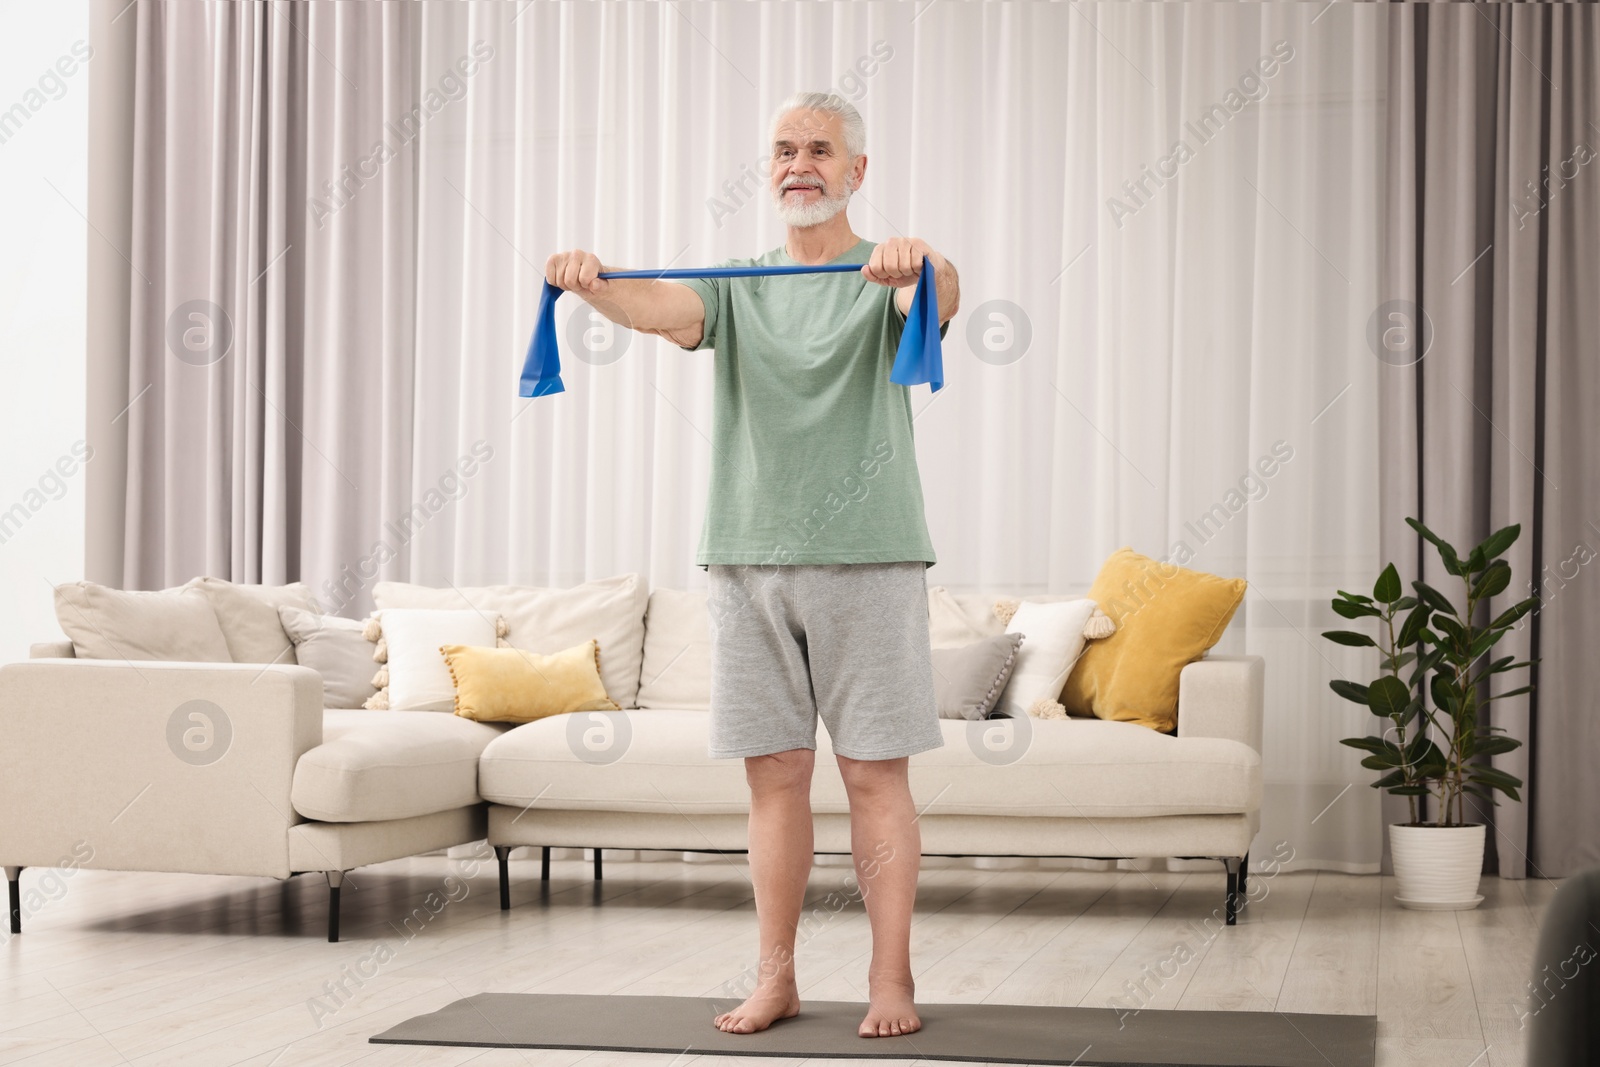 Photo of Senior man doing exercise with fitness elastic band on mat at home